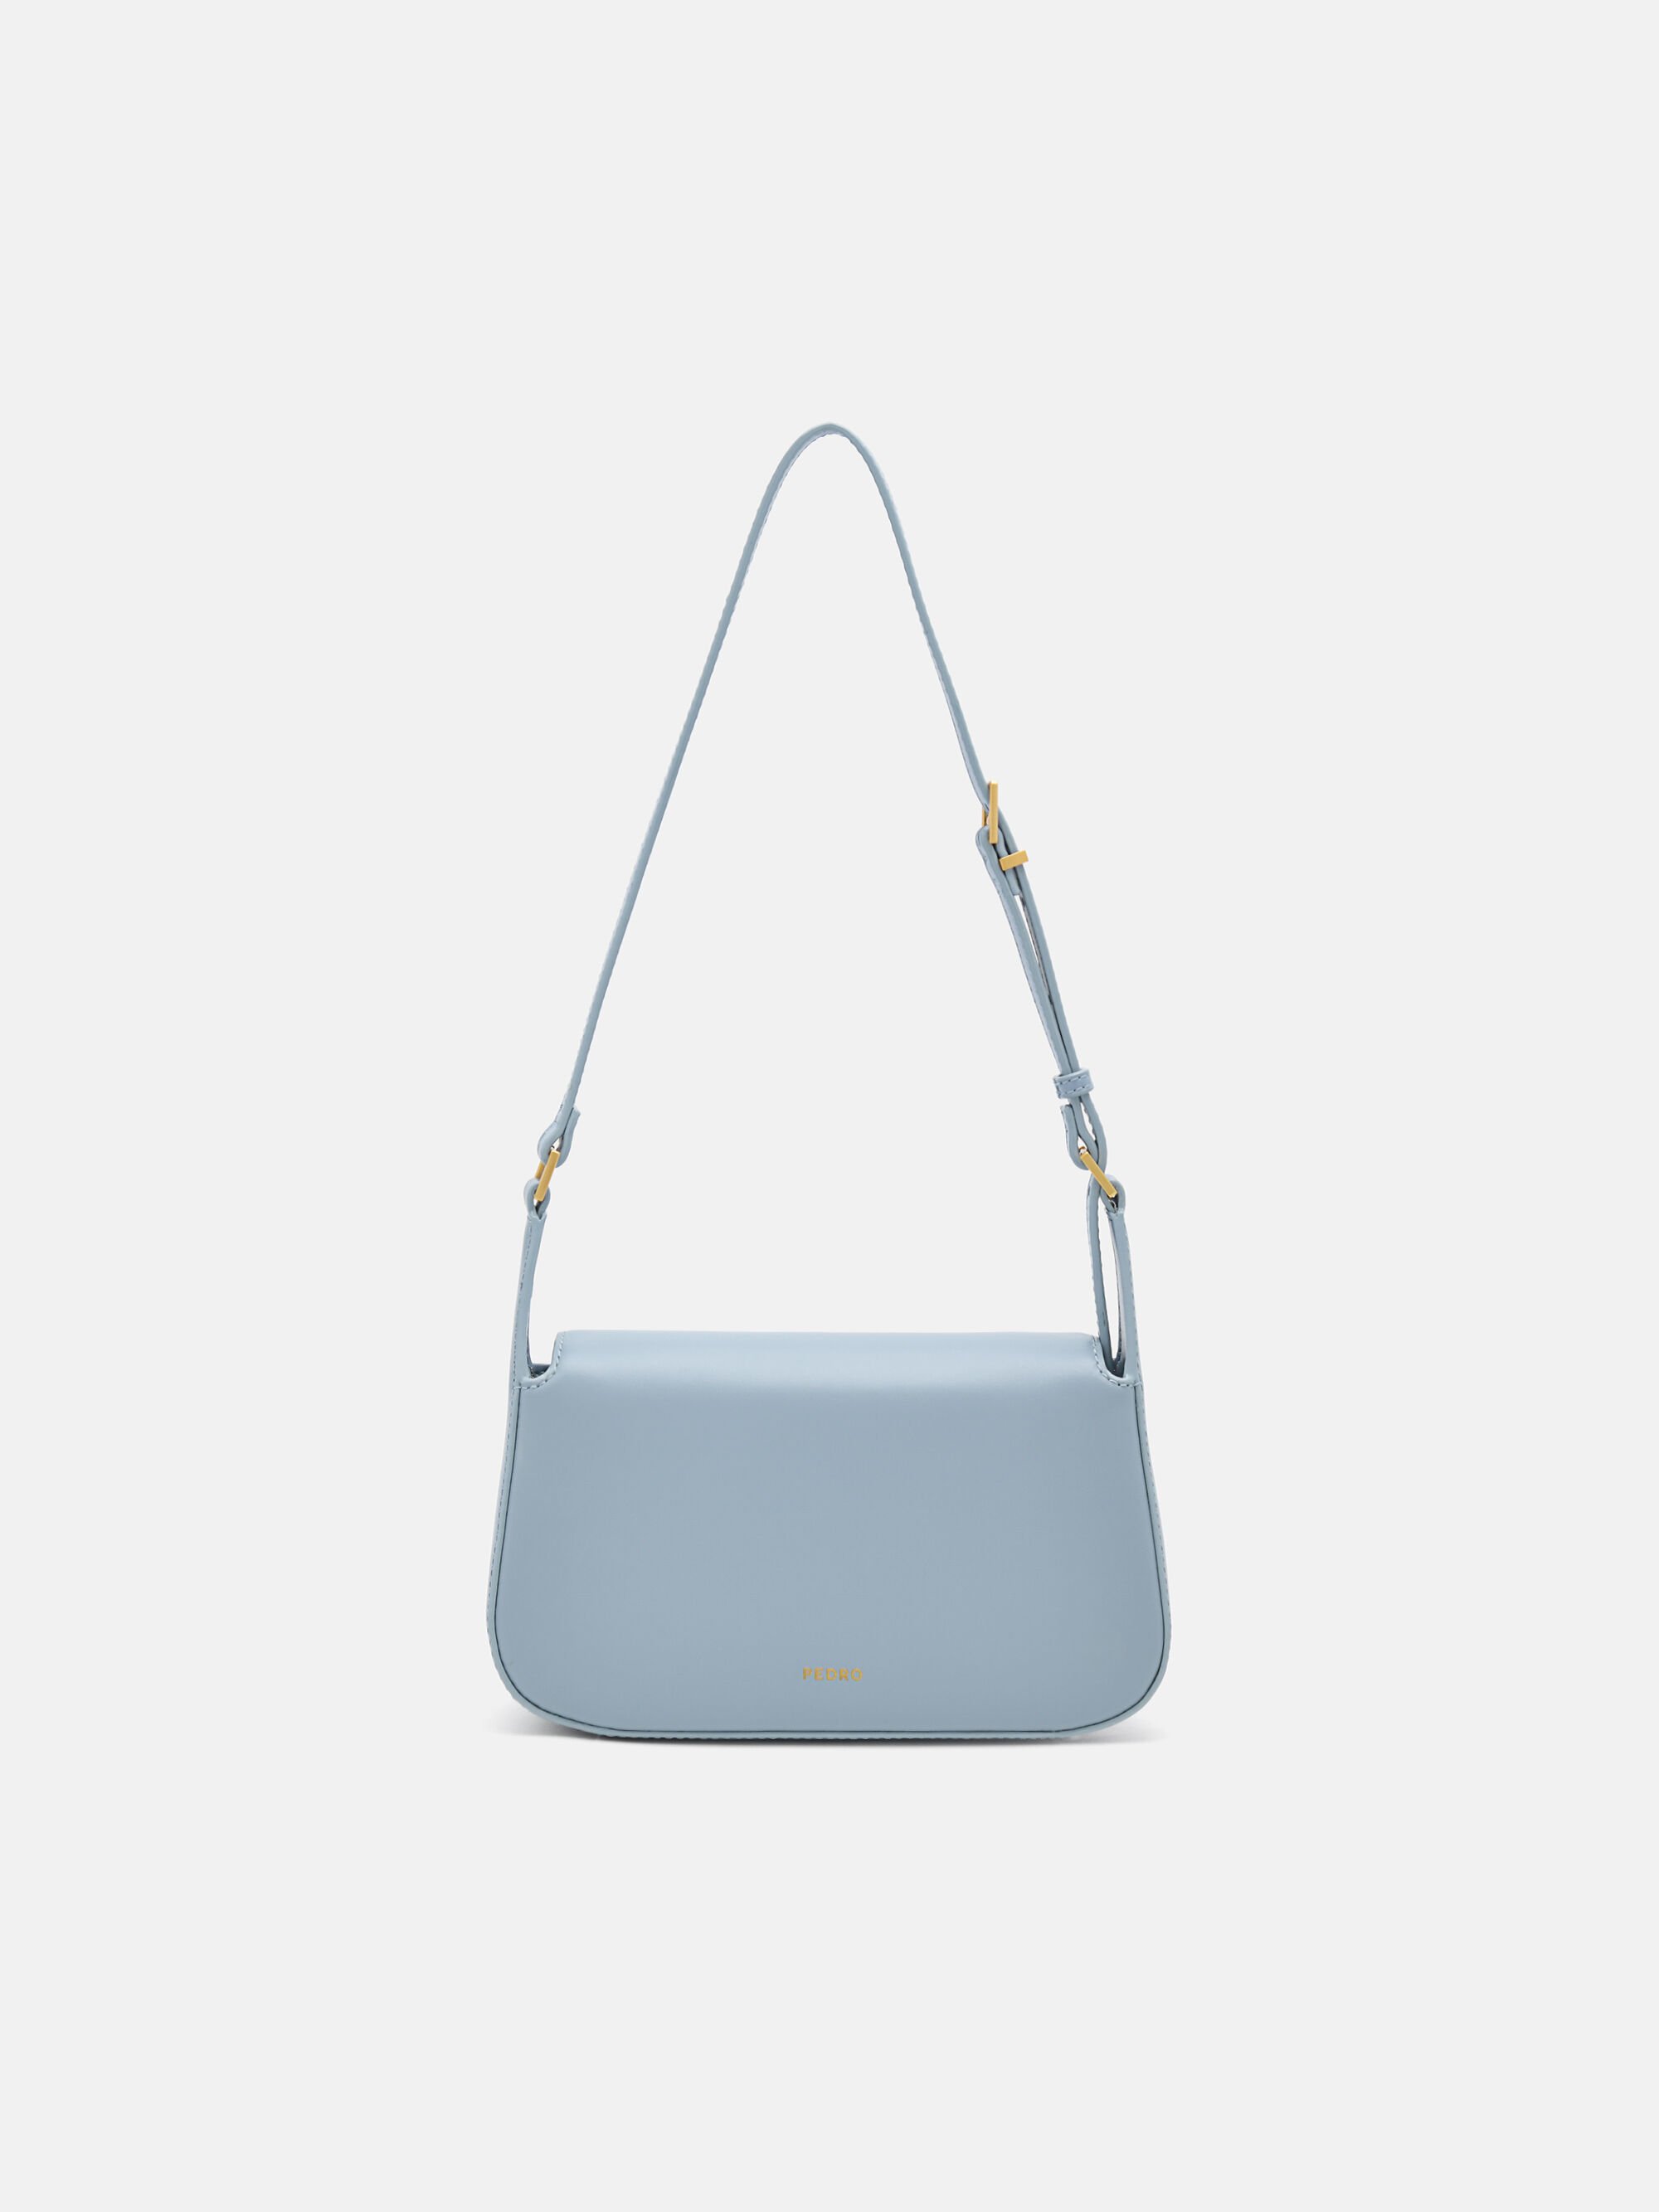 Shop the Latest Pedro Bags in the Philippines in November, 2023